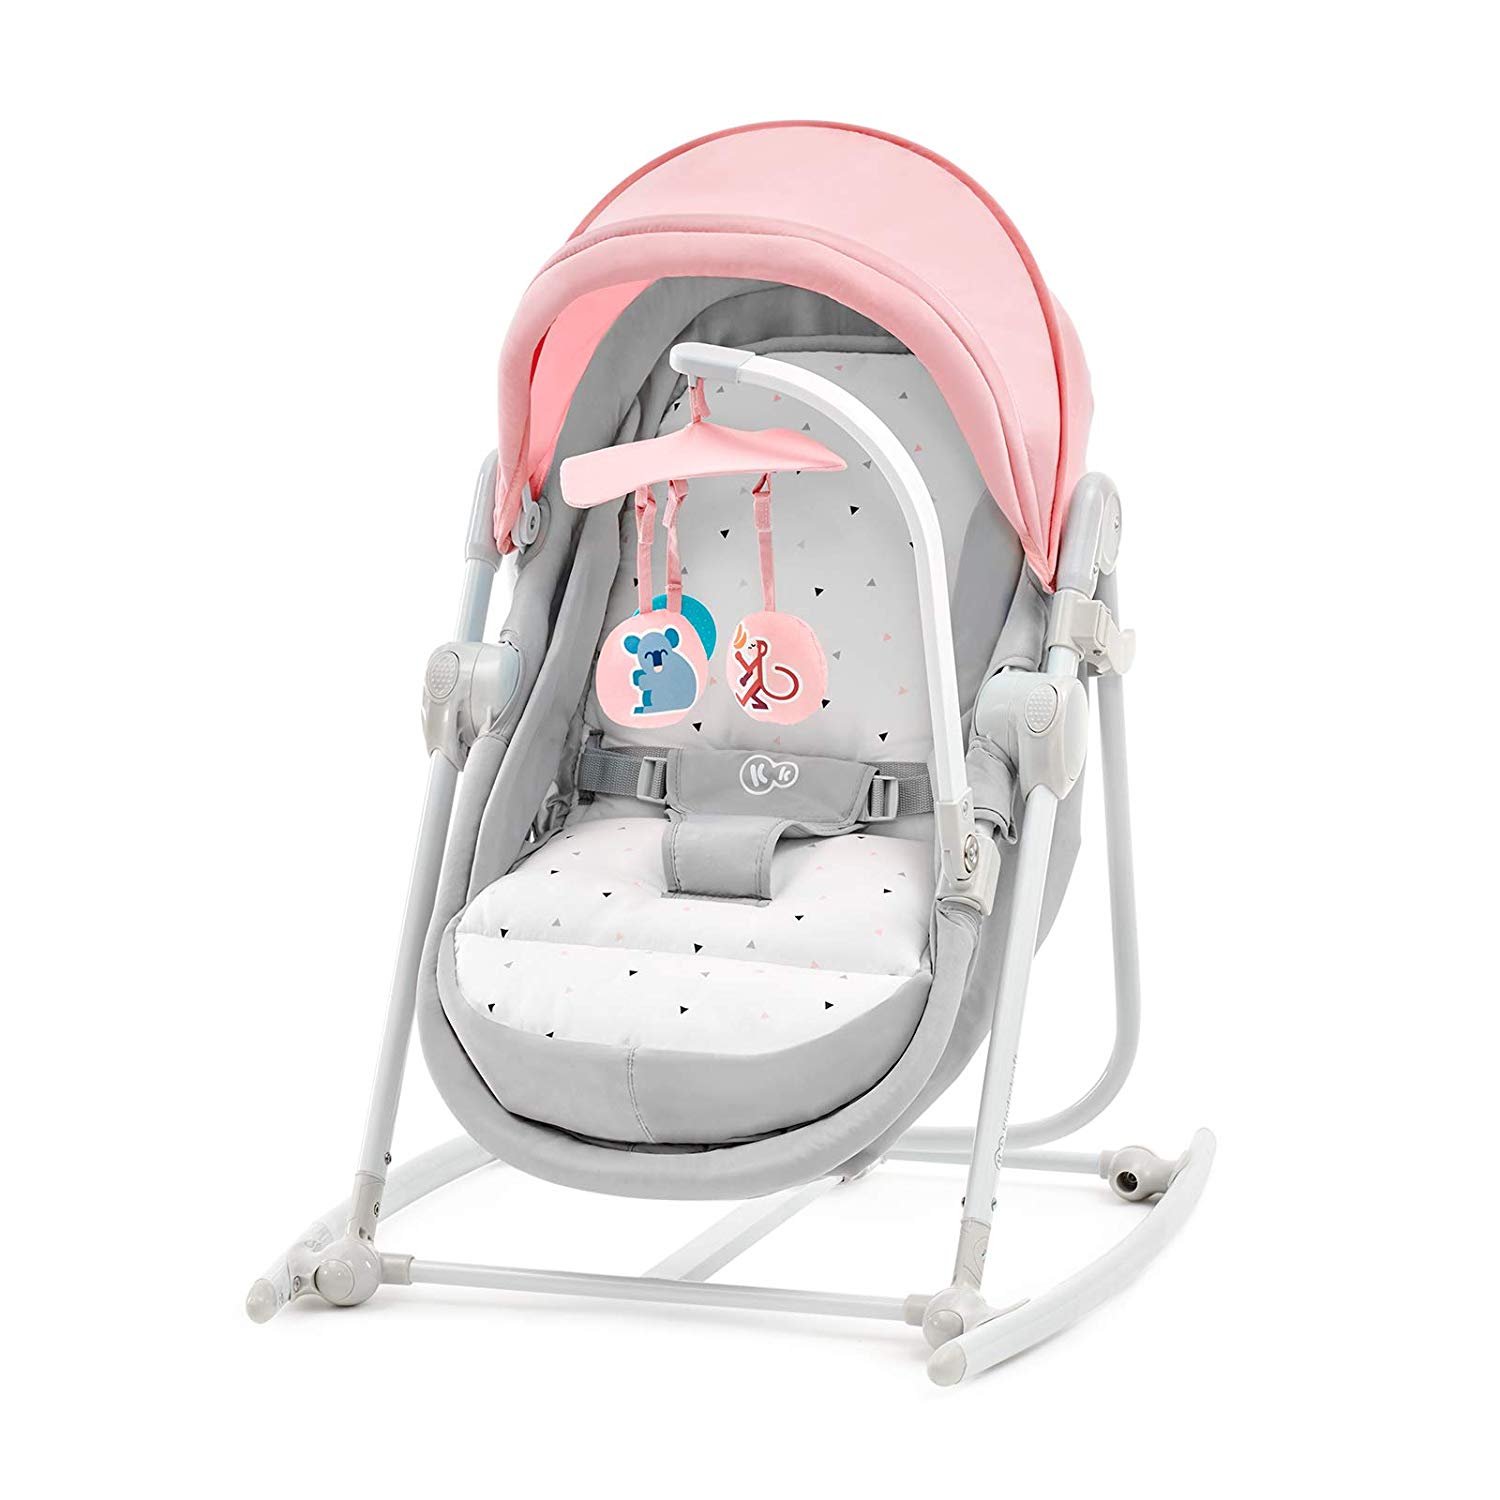 Kinderkraft baby bouncer UNIMO 5 in 1, baby swing, seesaw, rocker, cradle, play arch, toys, lying position, foldable, bracket with toys, mosquito net, pink